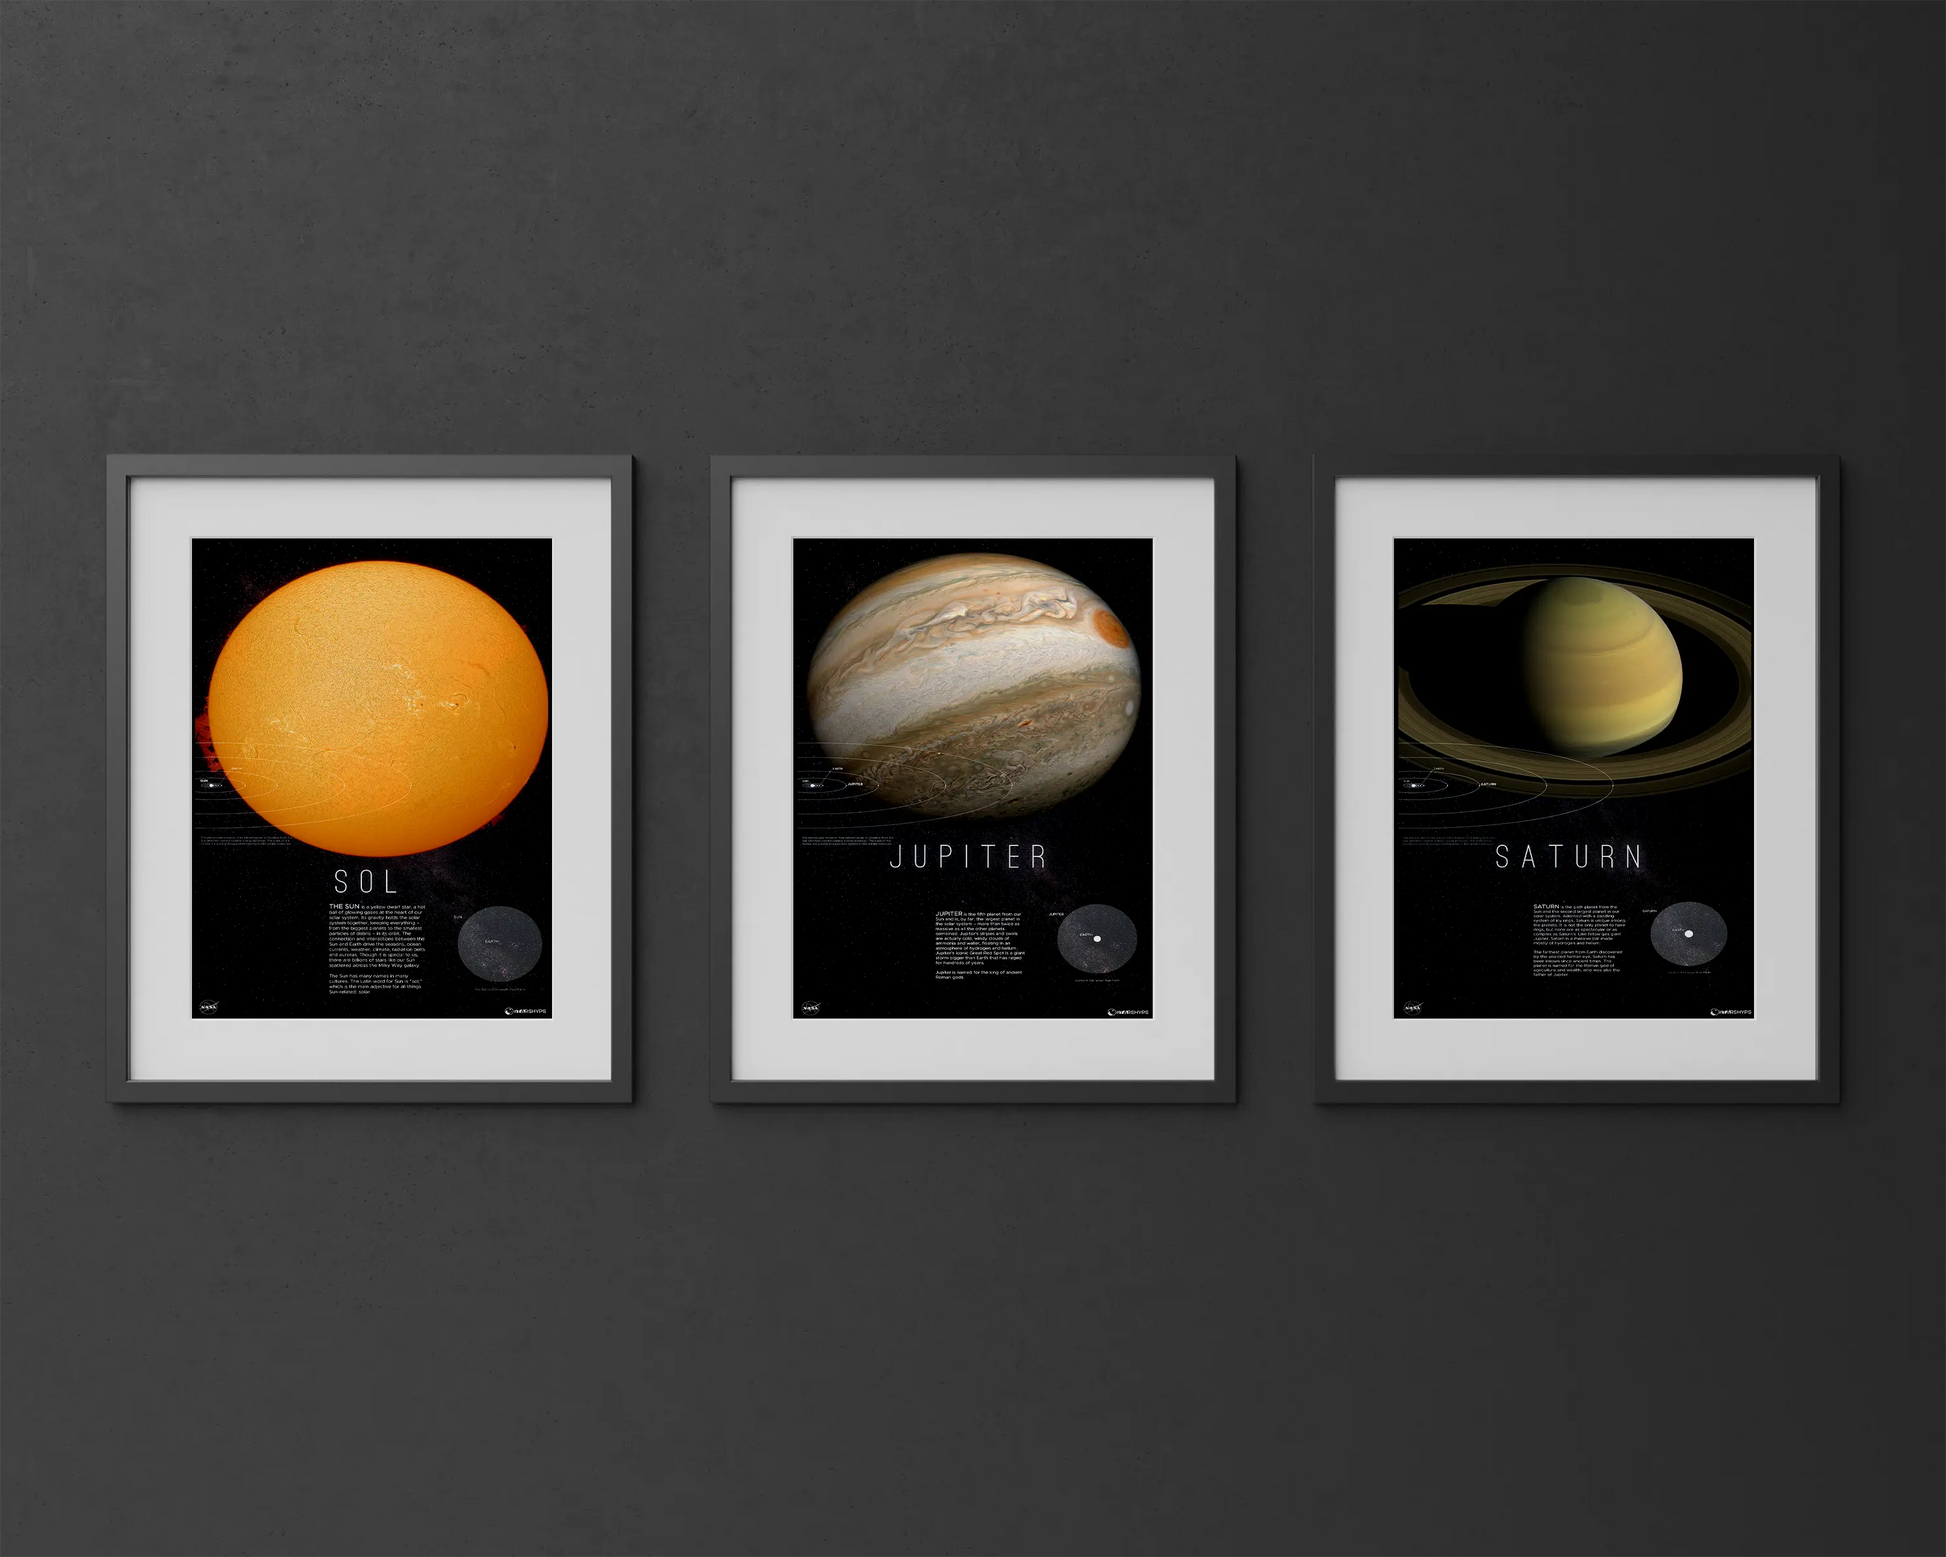 Neptune Neptunian Tranquility Decor | Rocket Blueprint Posters | The image displays three framed posters on a dark background, each featuring an image and description of the Sun, Jupiter, and Saturn, with their names prominently labeled below the images.